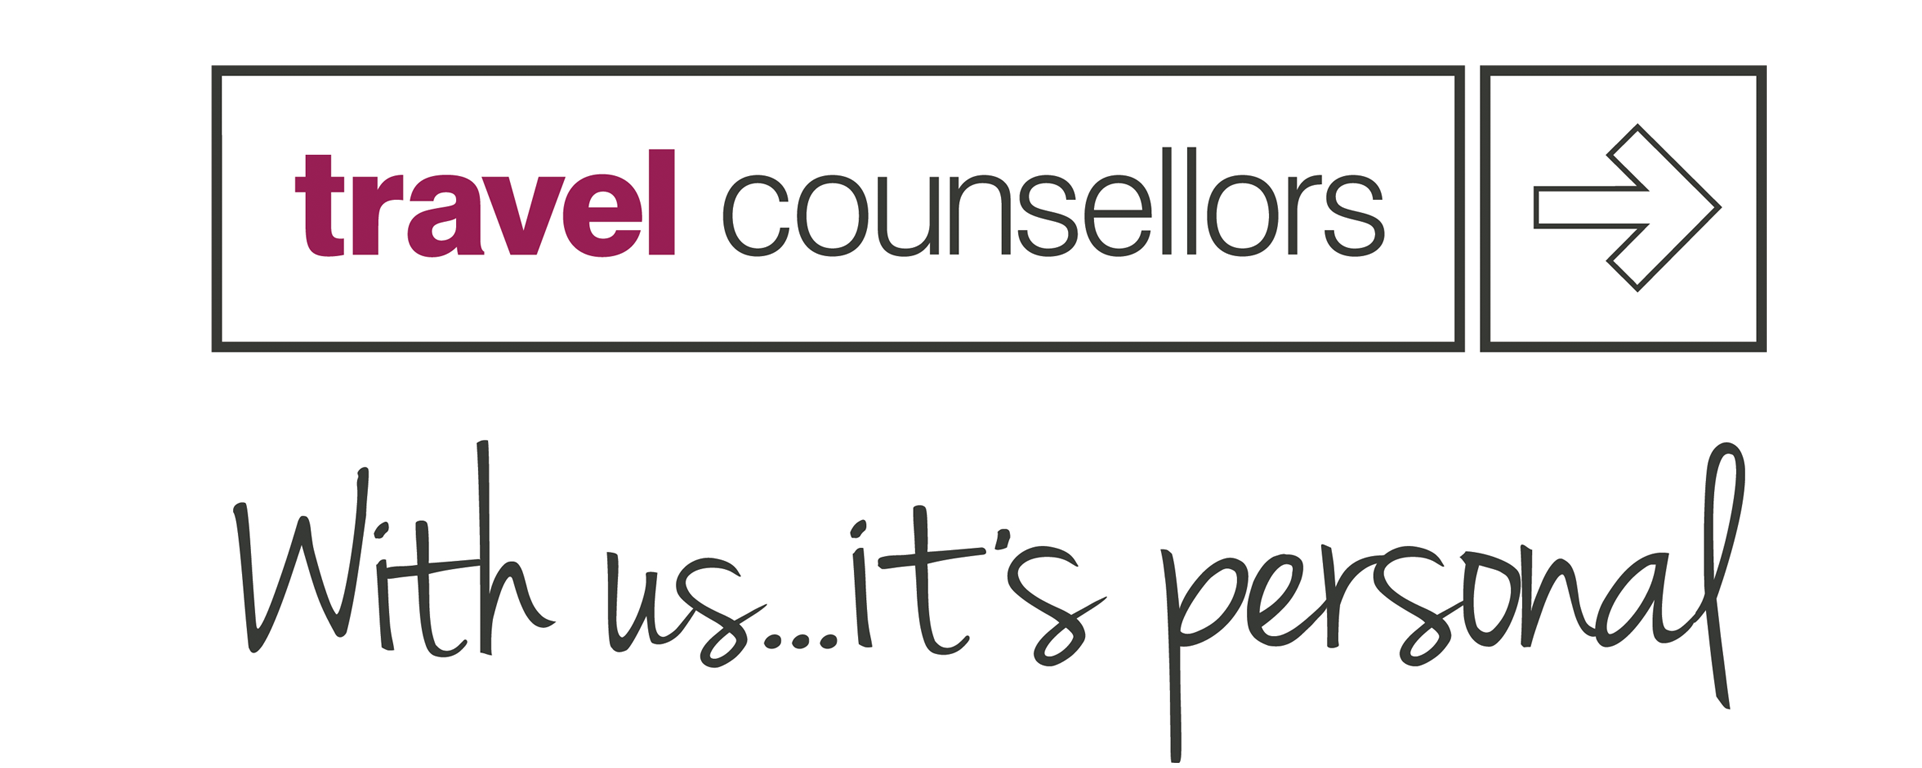 travel counsellors partnership manager